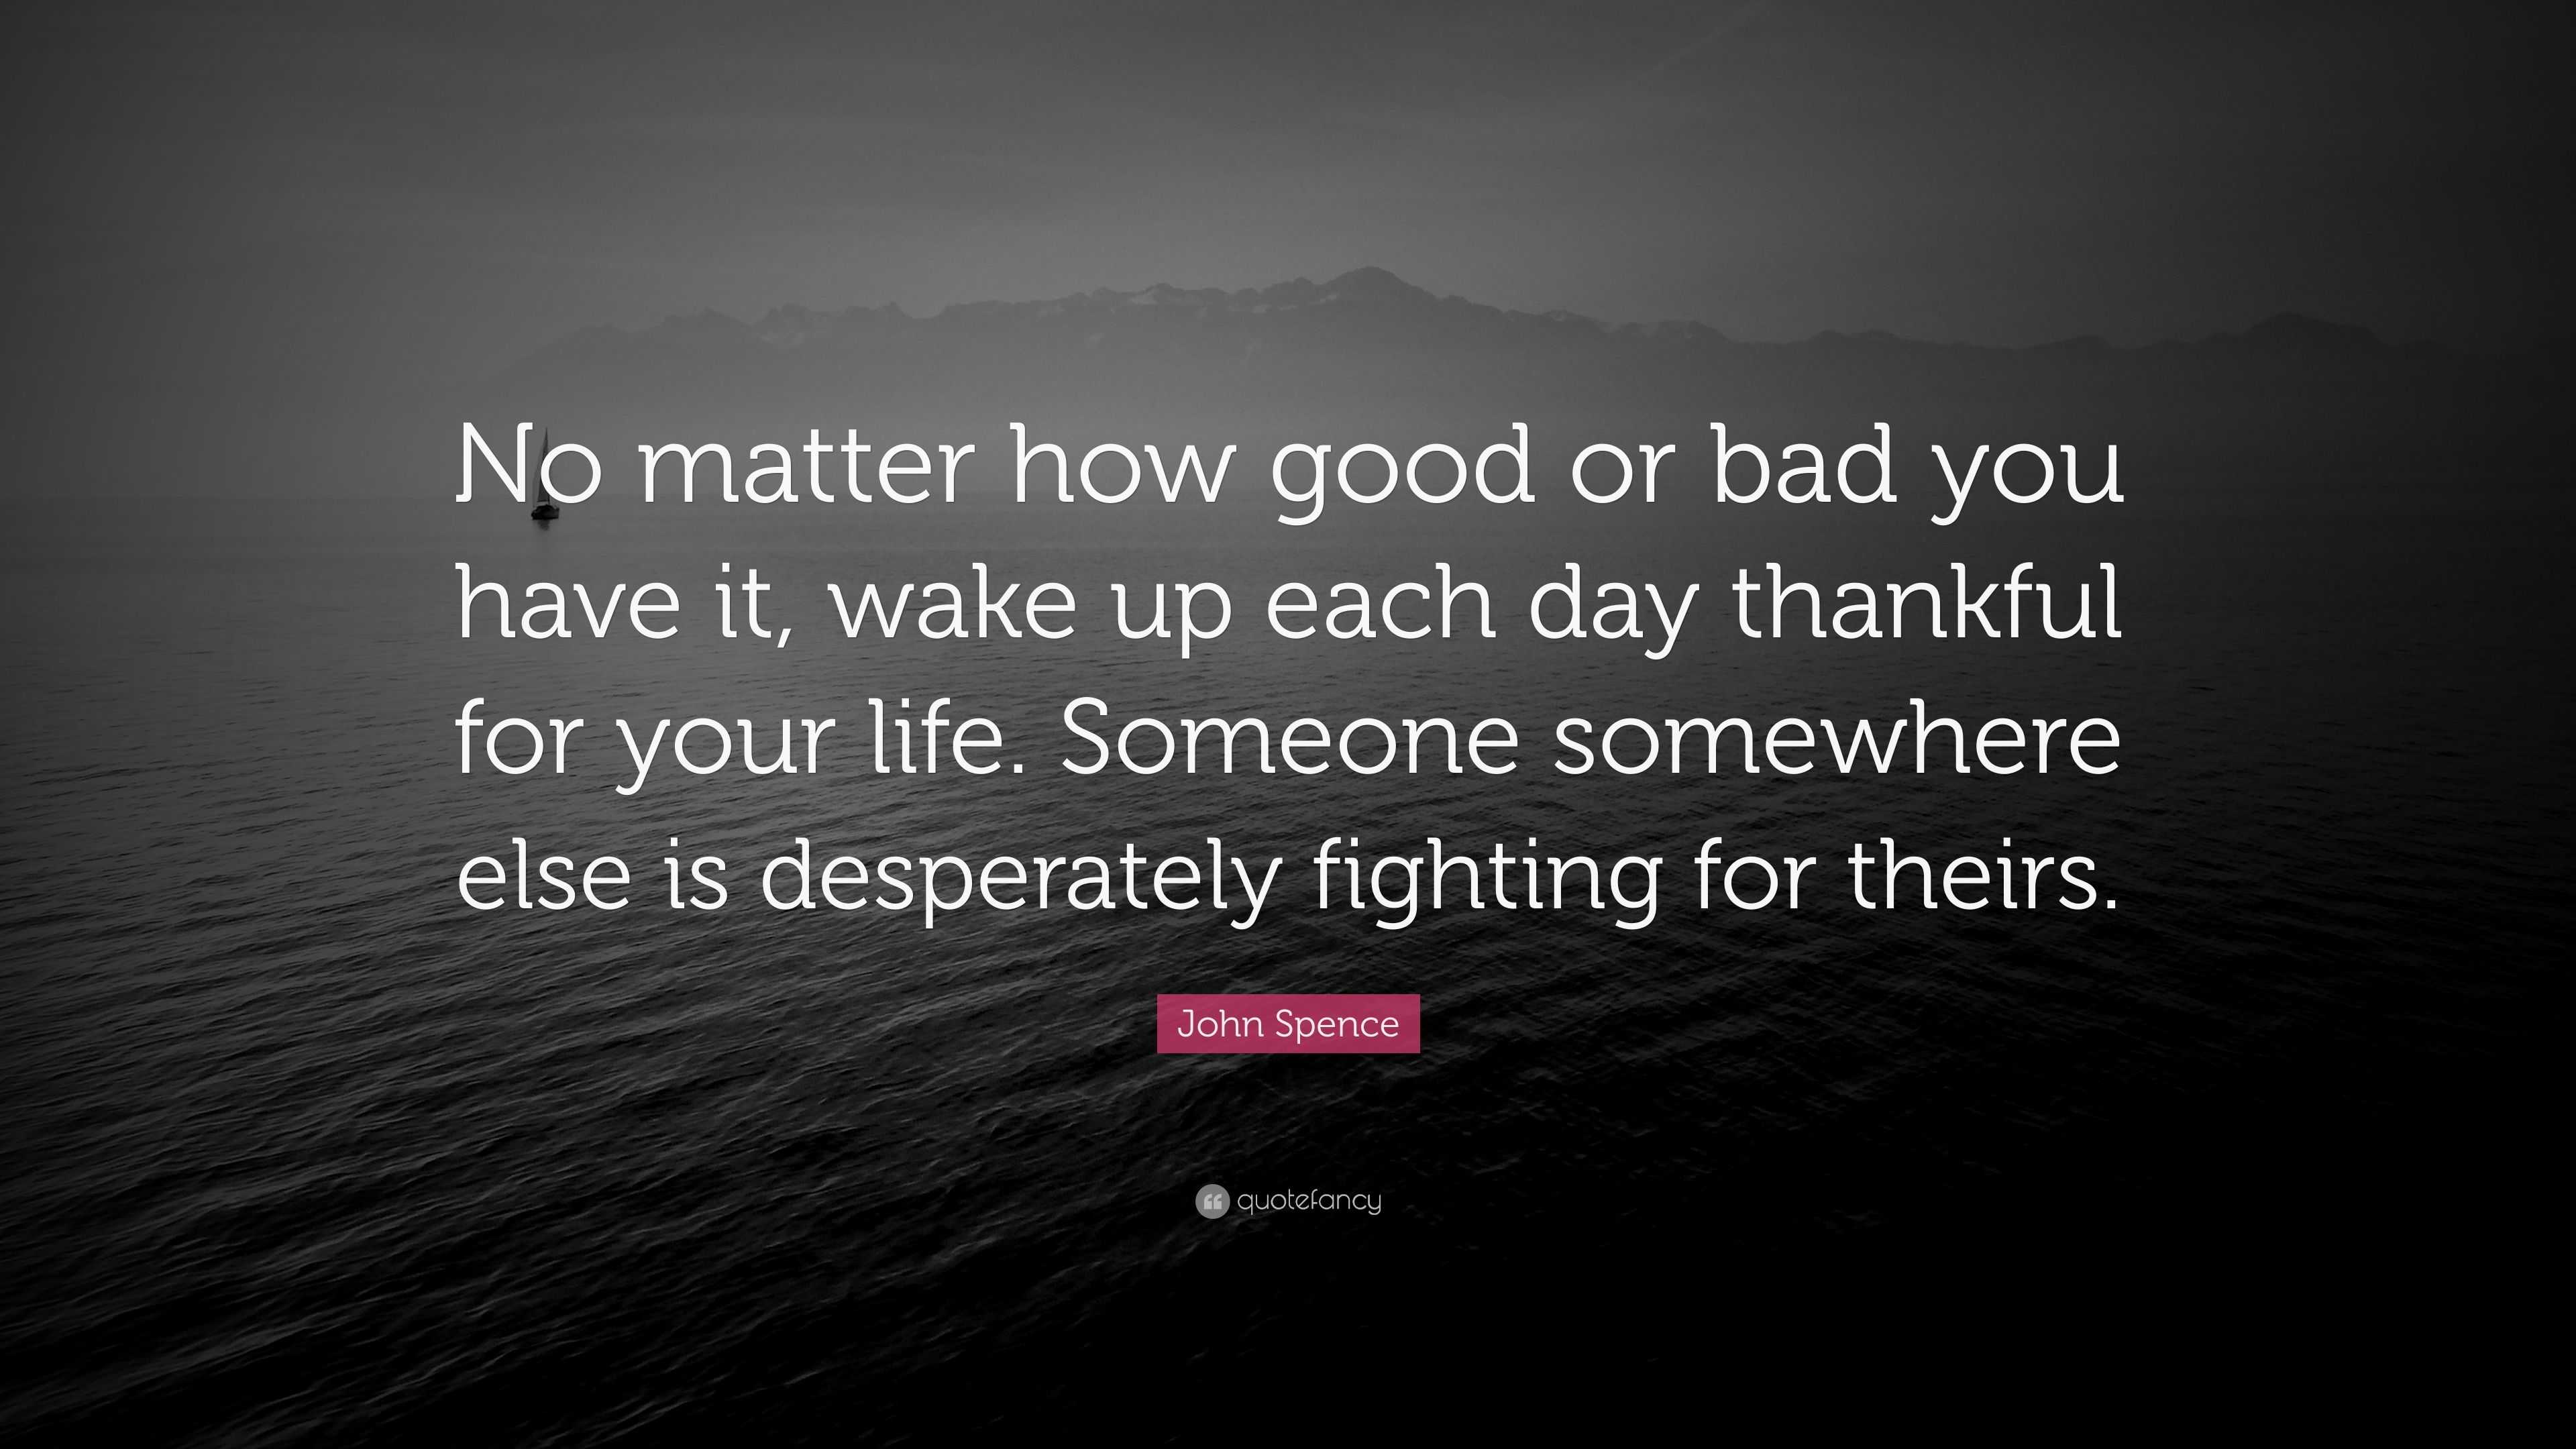 John Spence Quote “No matter how good or bad you have it wake